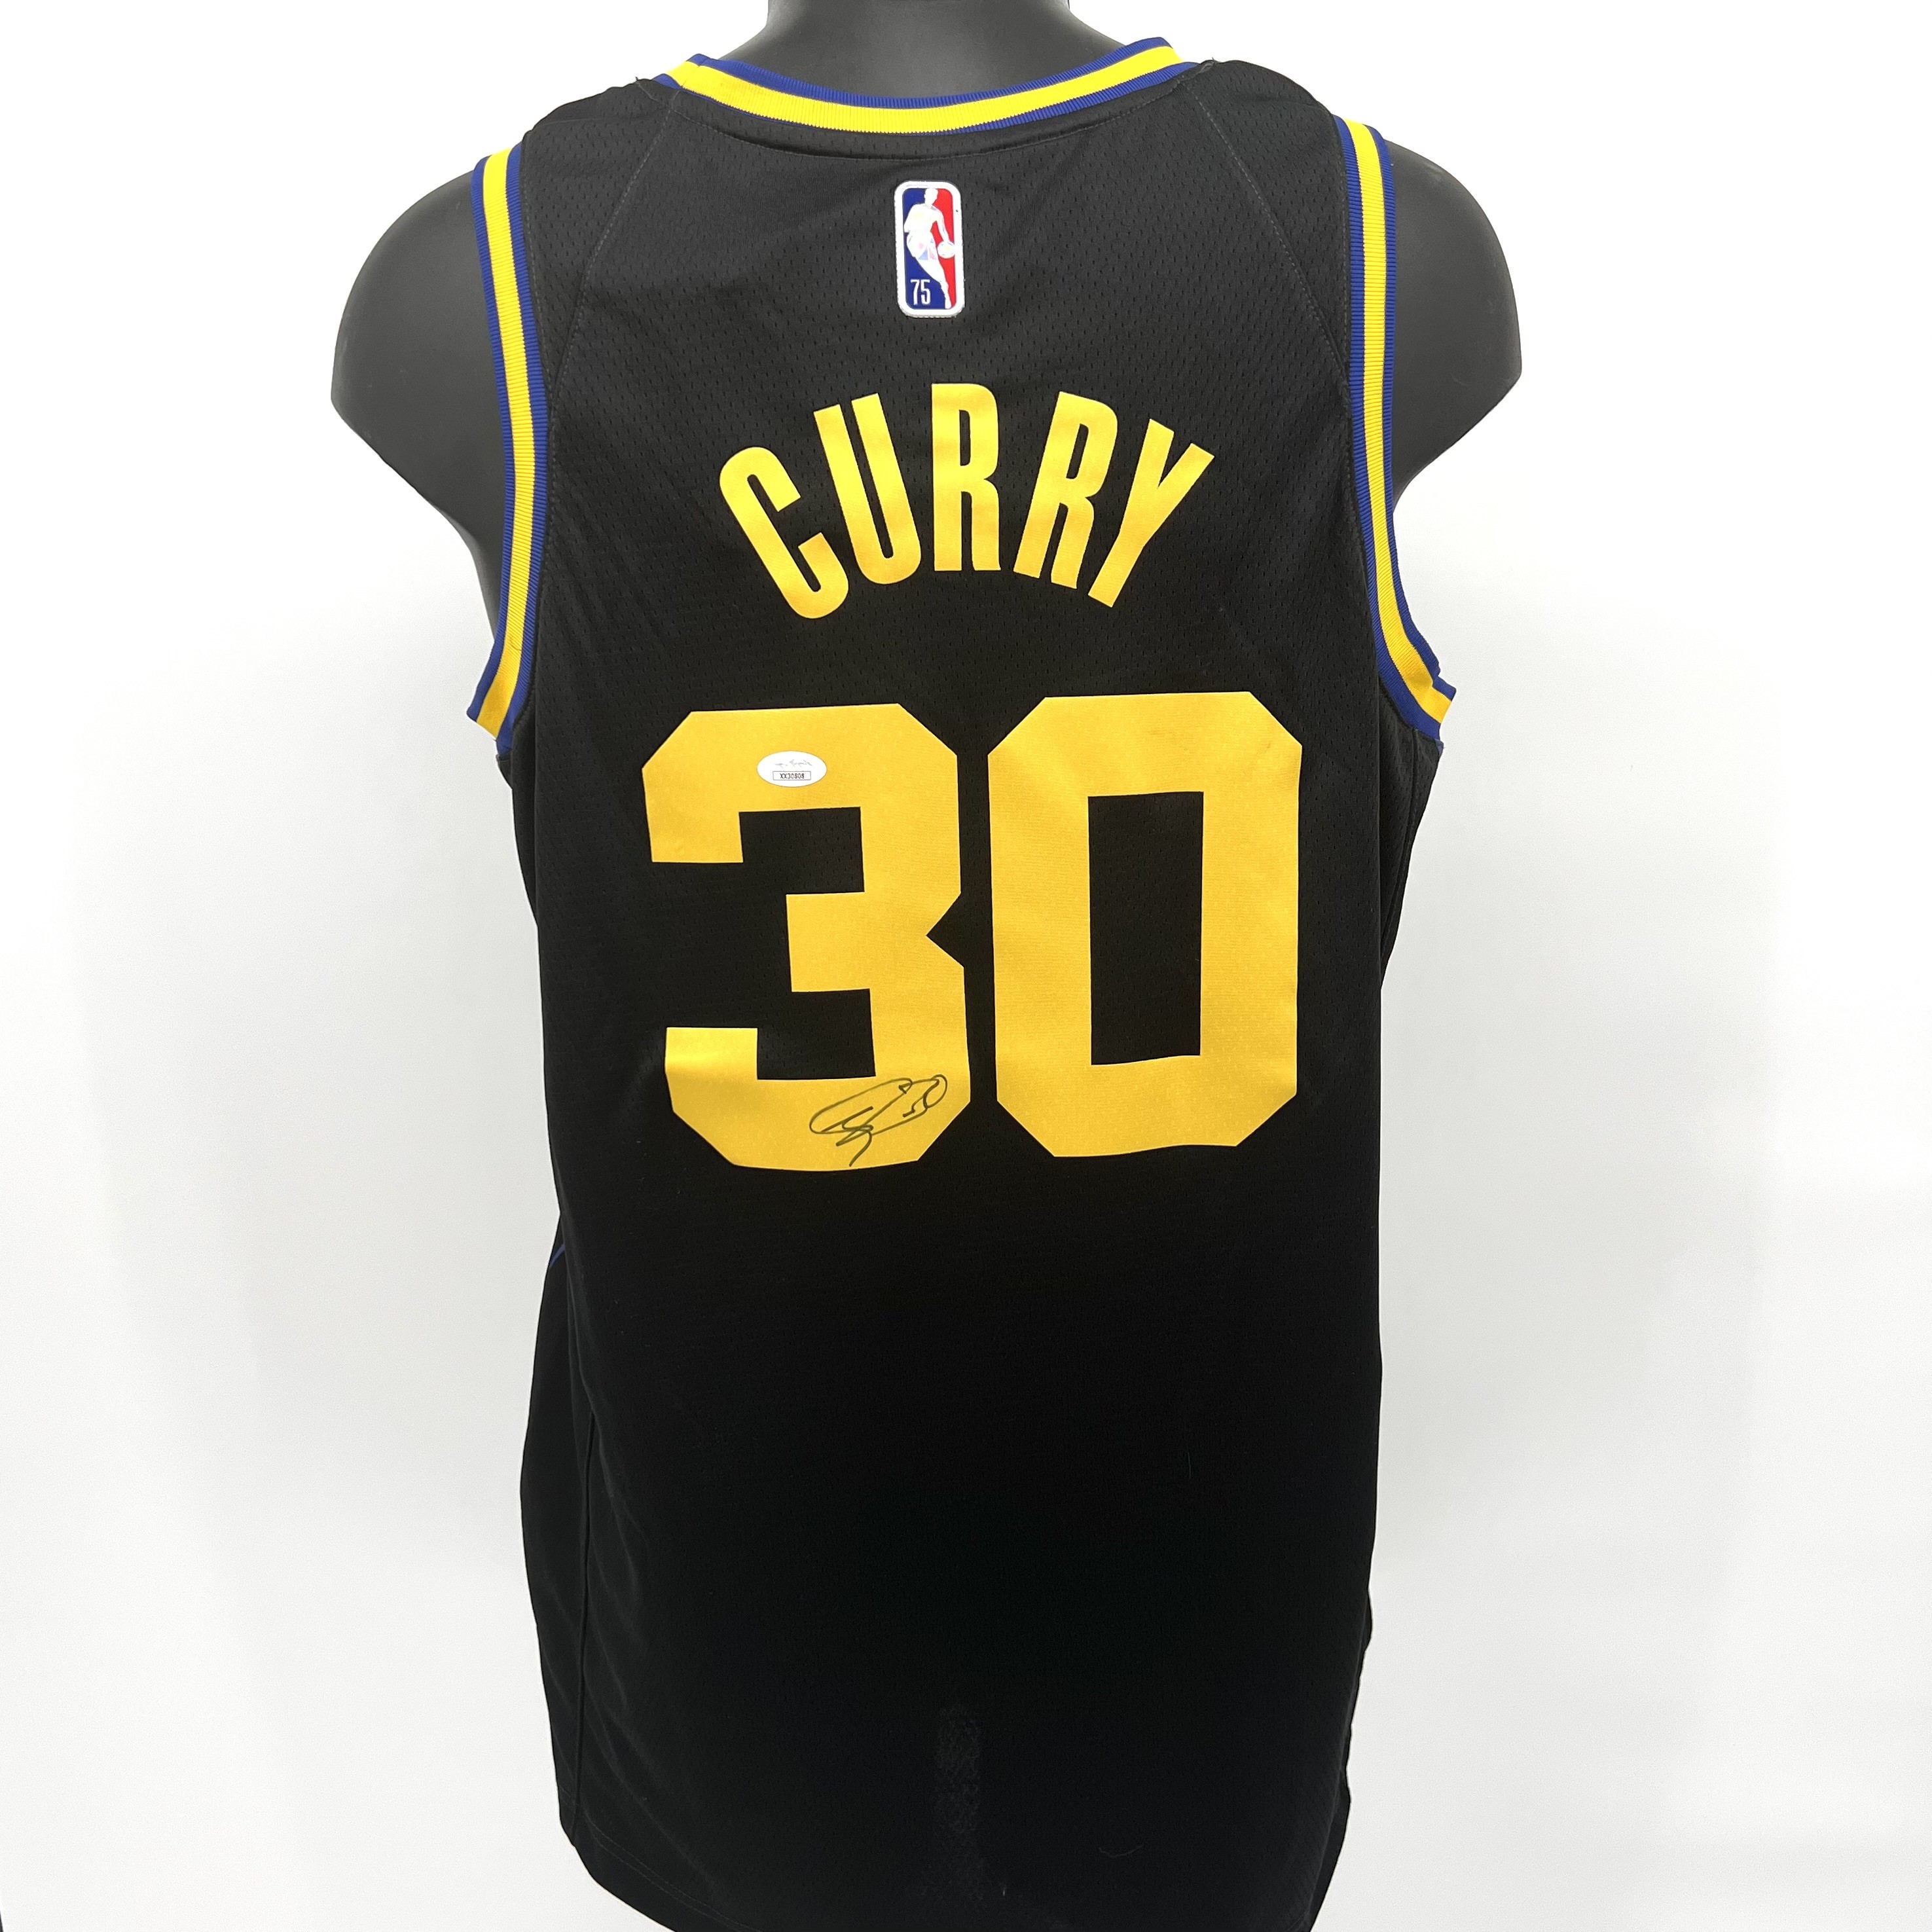 Stephen Curry and Klay Thompson Golden State Warriors Signed and Framed  Jerseys with LED Lighting - CharityStars